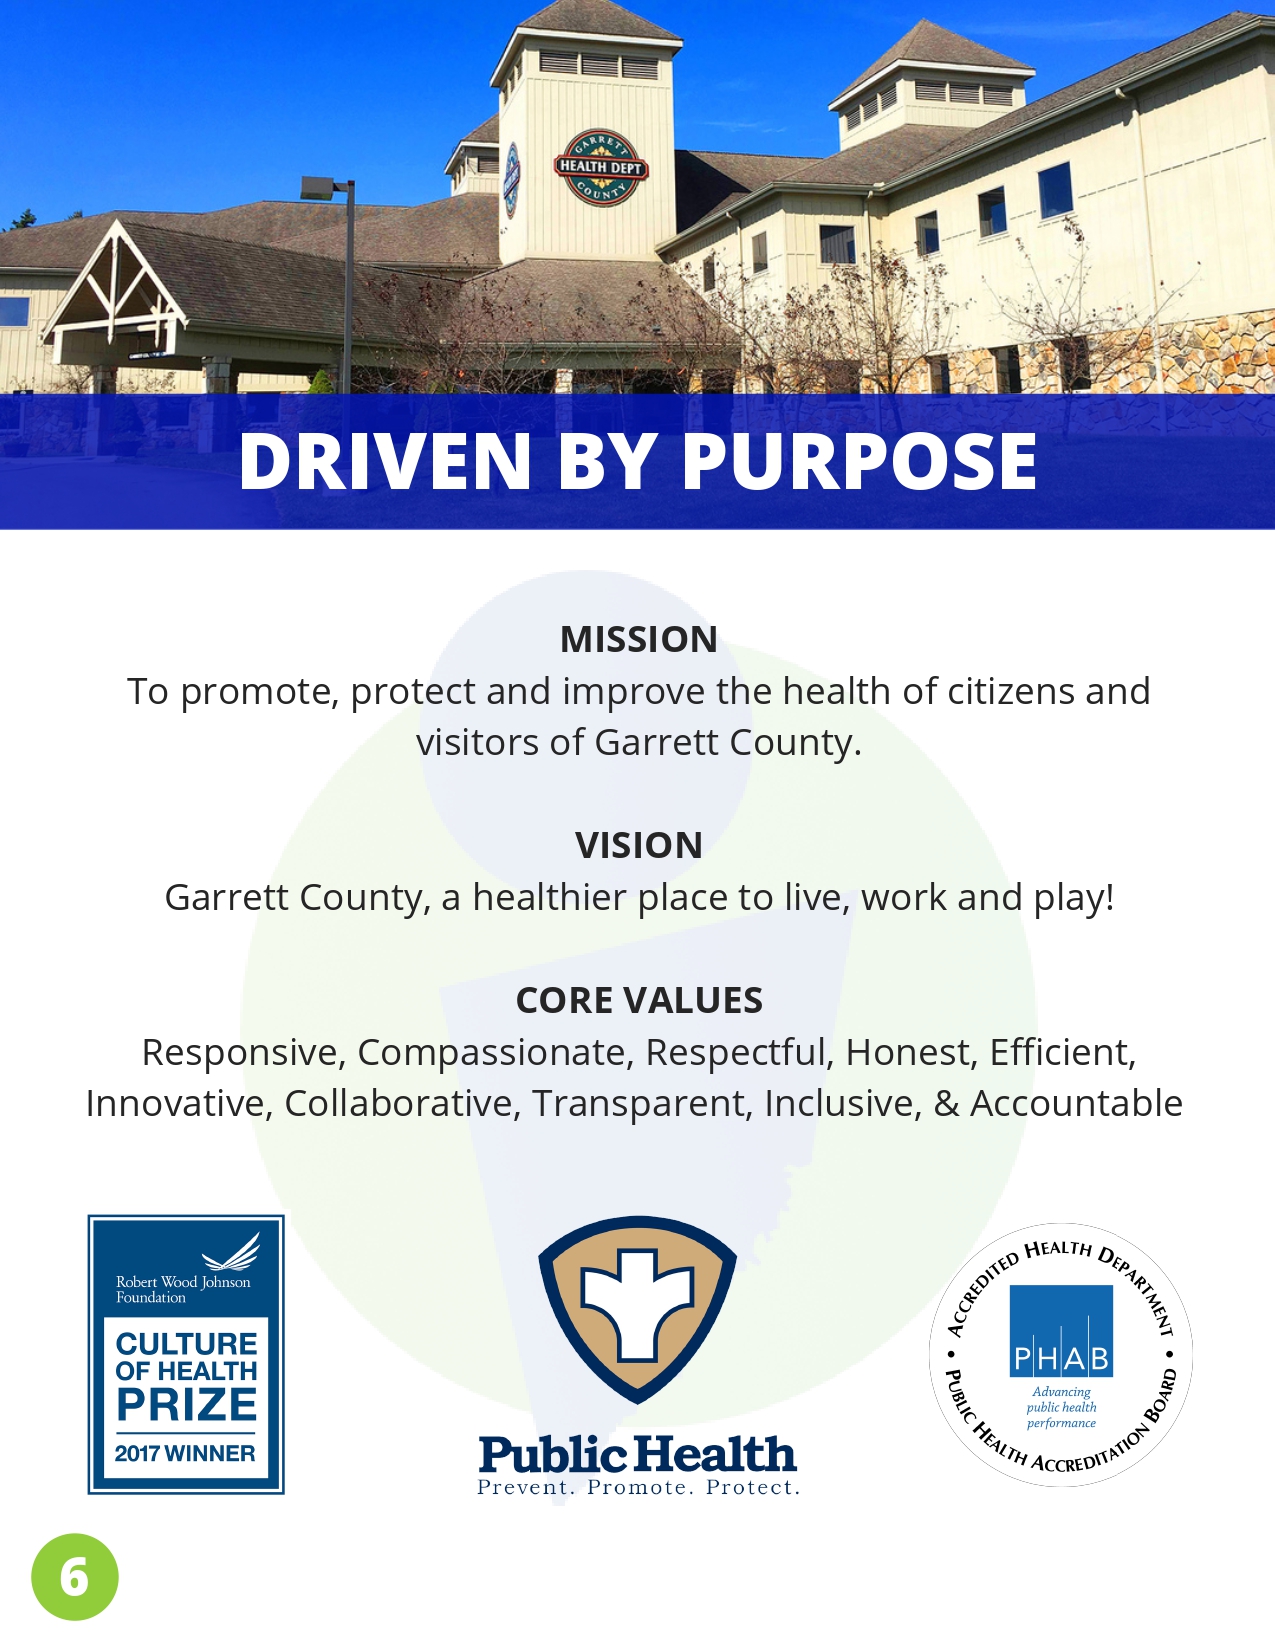 Mission, Vision, and Core Values from the GCHD Strategic Plan